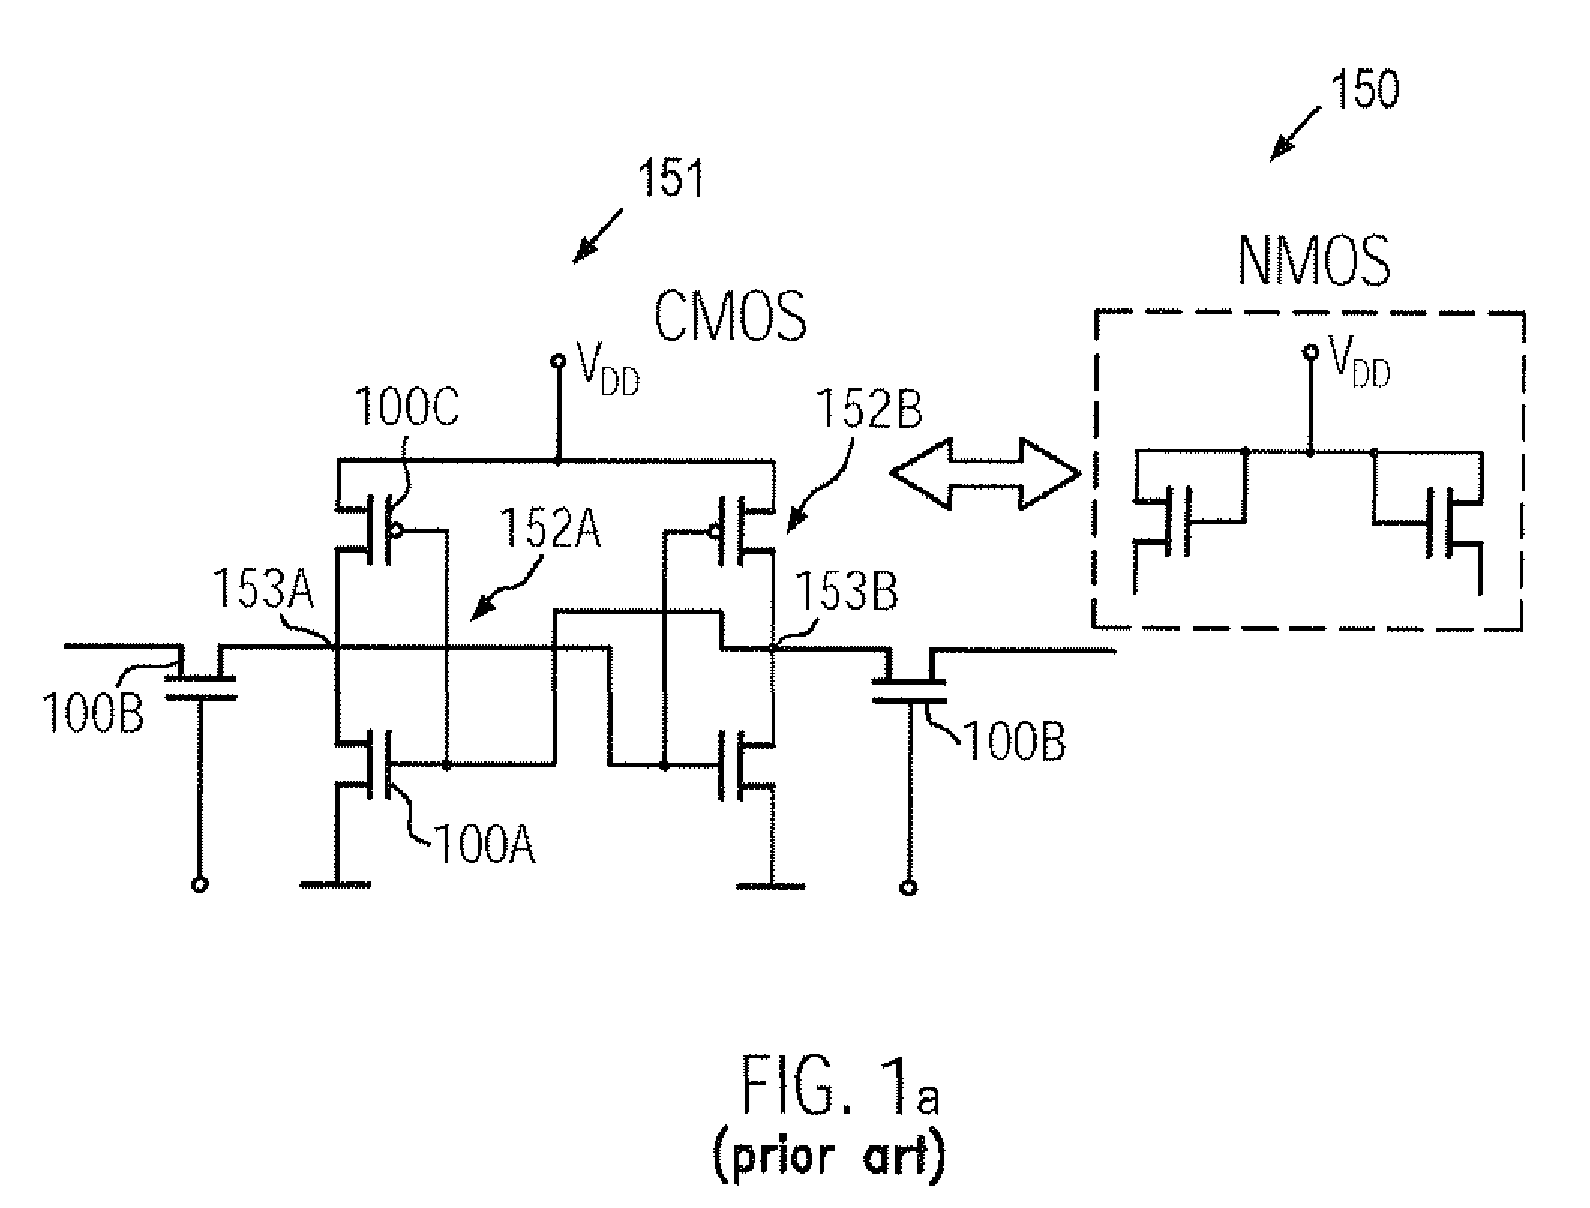 Drive current adjustment for transistors formed in the same active region by locally inducing different lateral strain levels in the active region